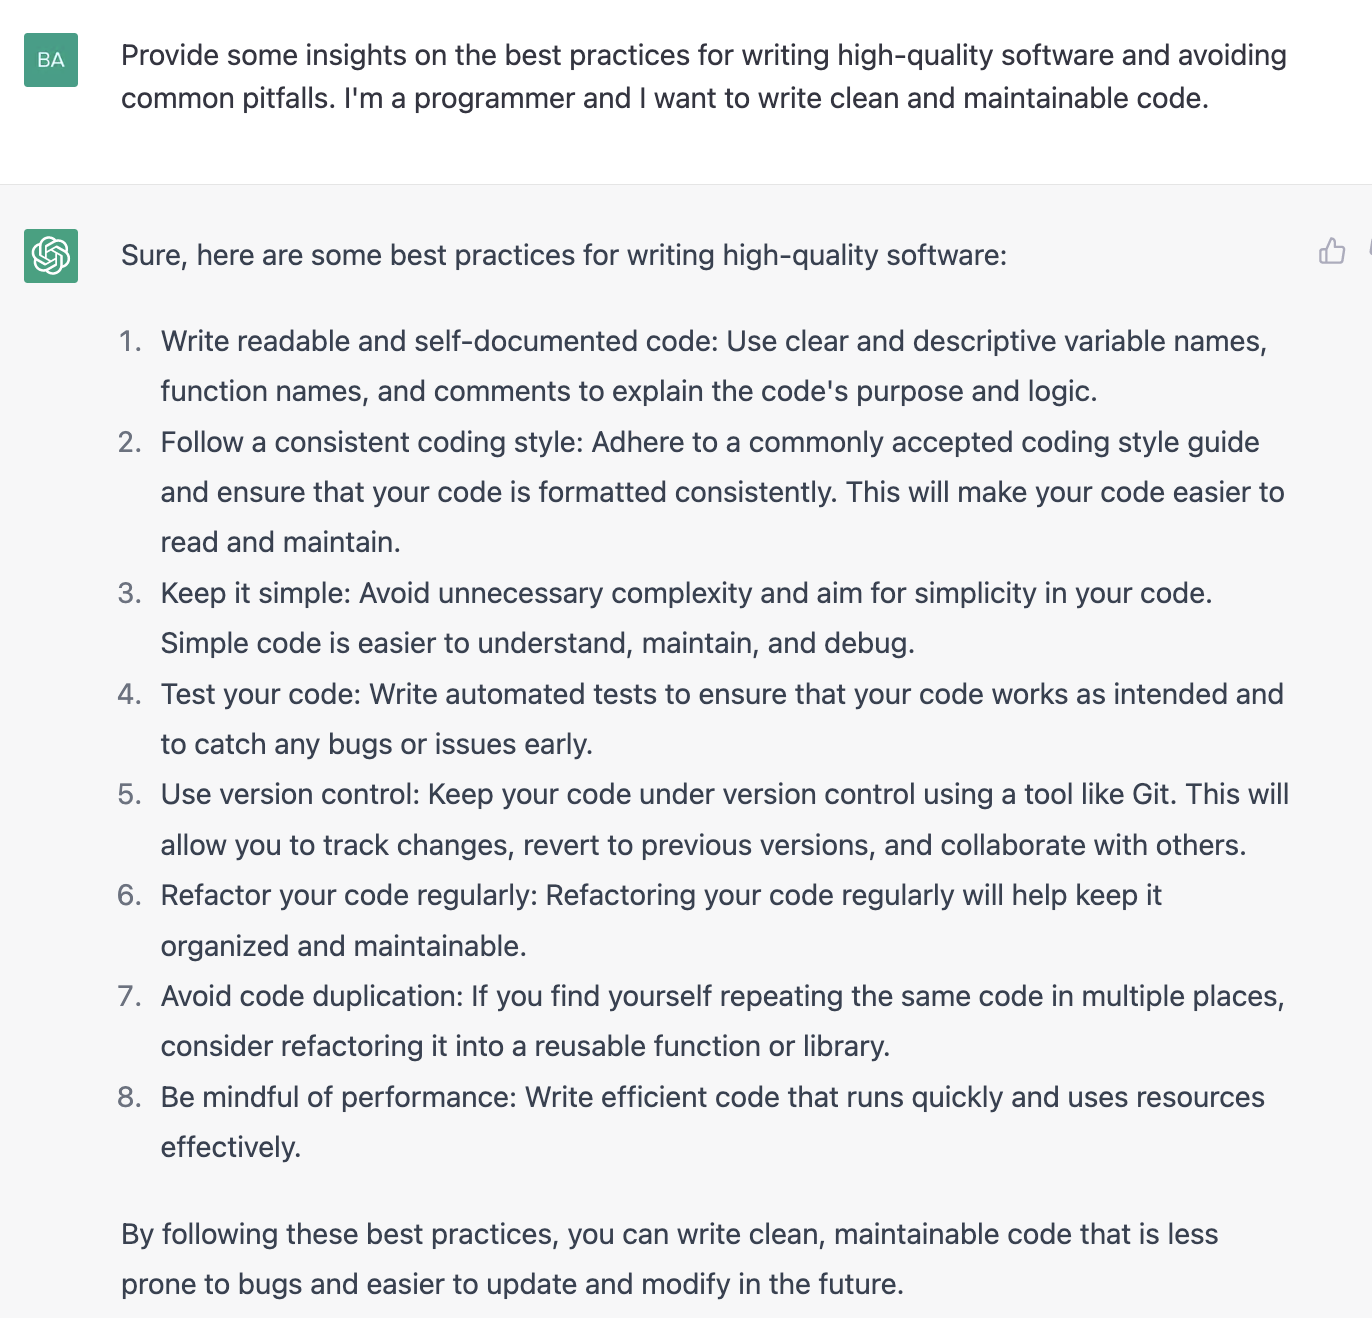 ChatGPT prompt about some insights on the best practices for writing high quality software and avoiding common pitfalls